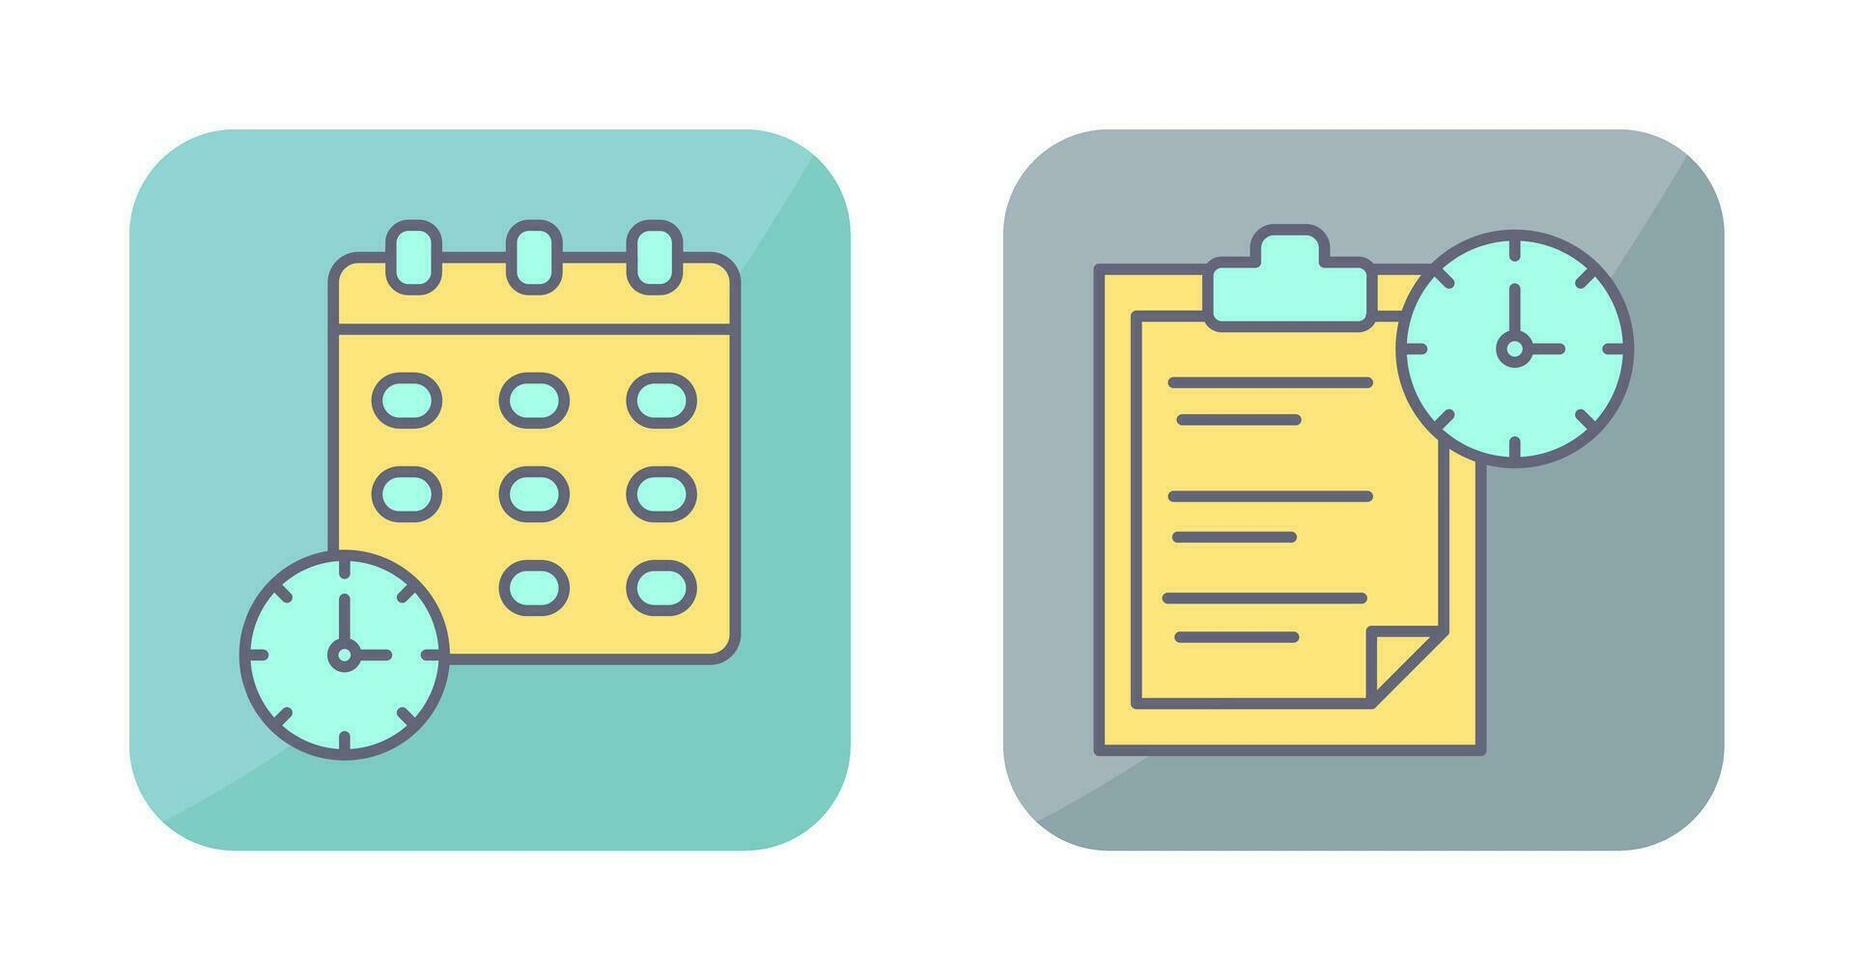 Deadline and Task Management Icon vector